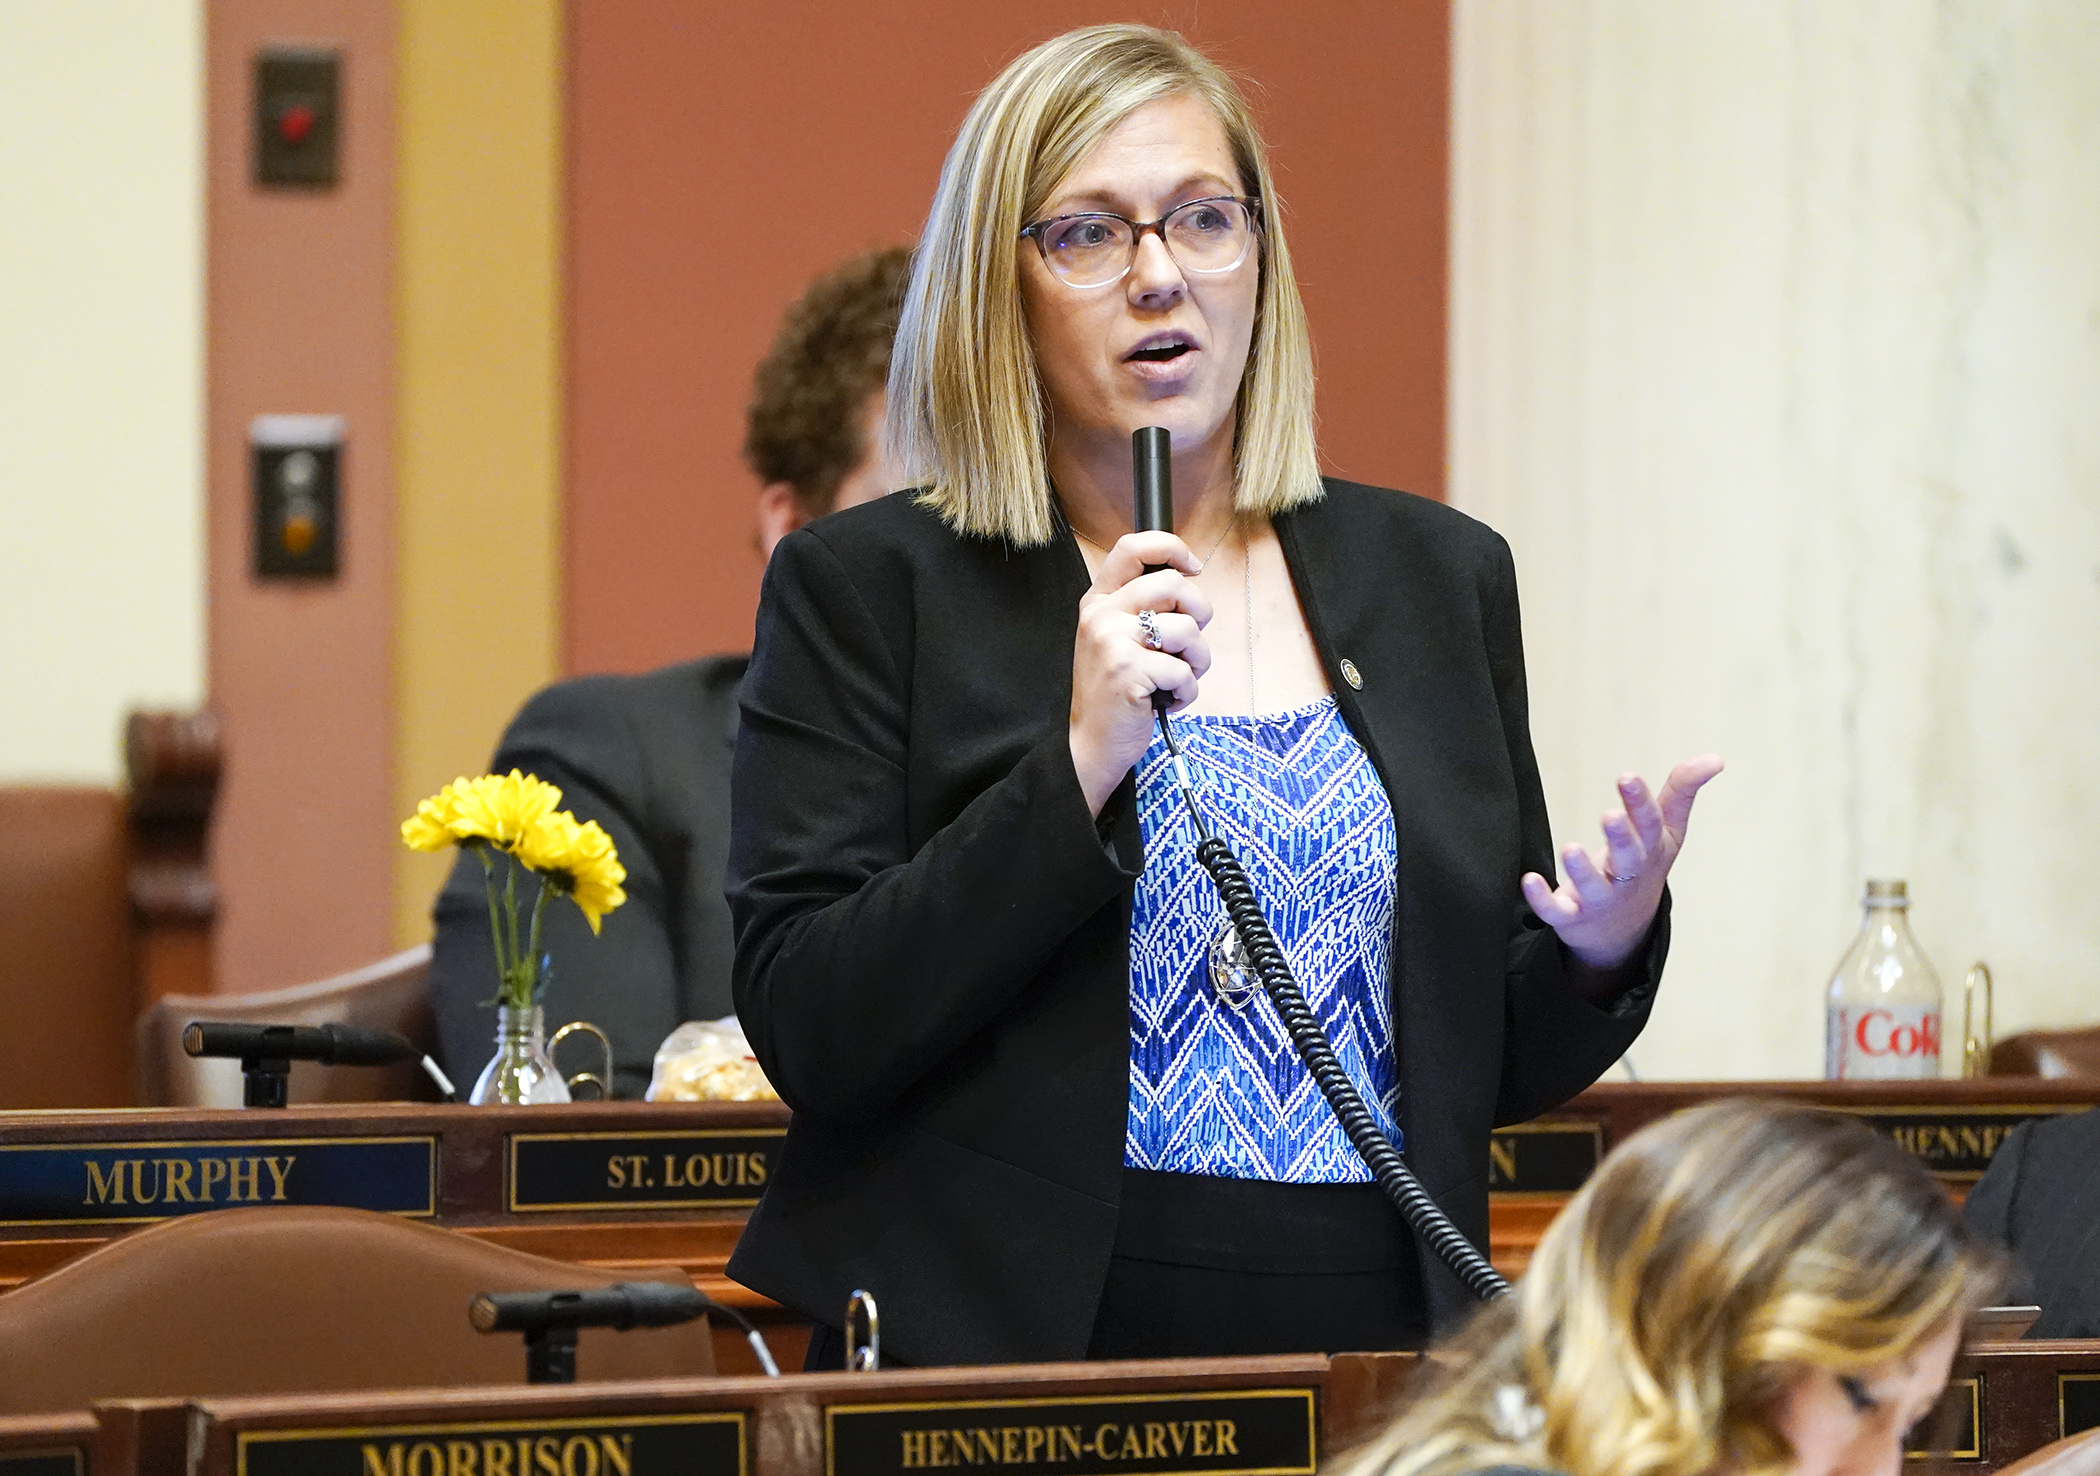 Rep. Jessica Hanson comments during the May 6 floor debate on HF3845. The bill she sponsors would, in part, create an Office of the Foster Youth Ombudsperson. (Photo by Paul Battaglia)